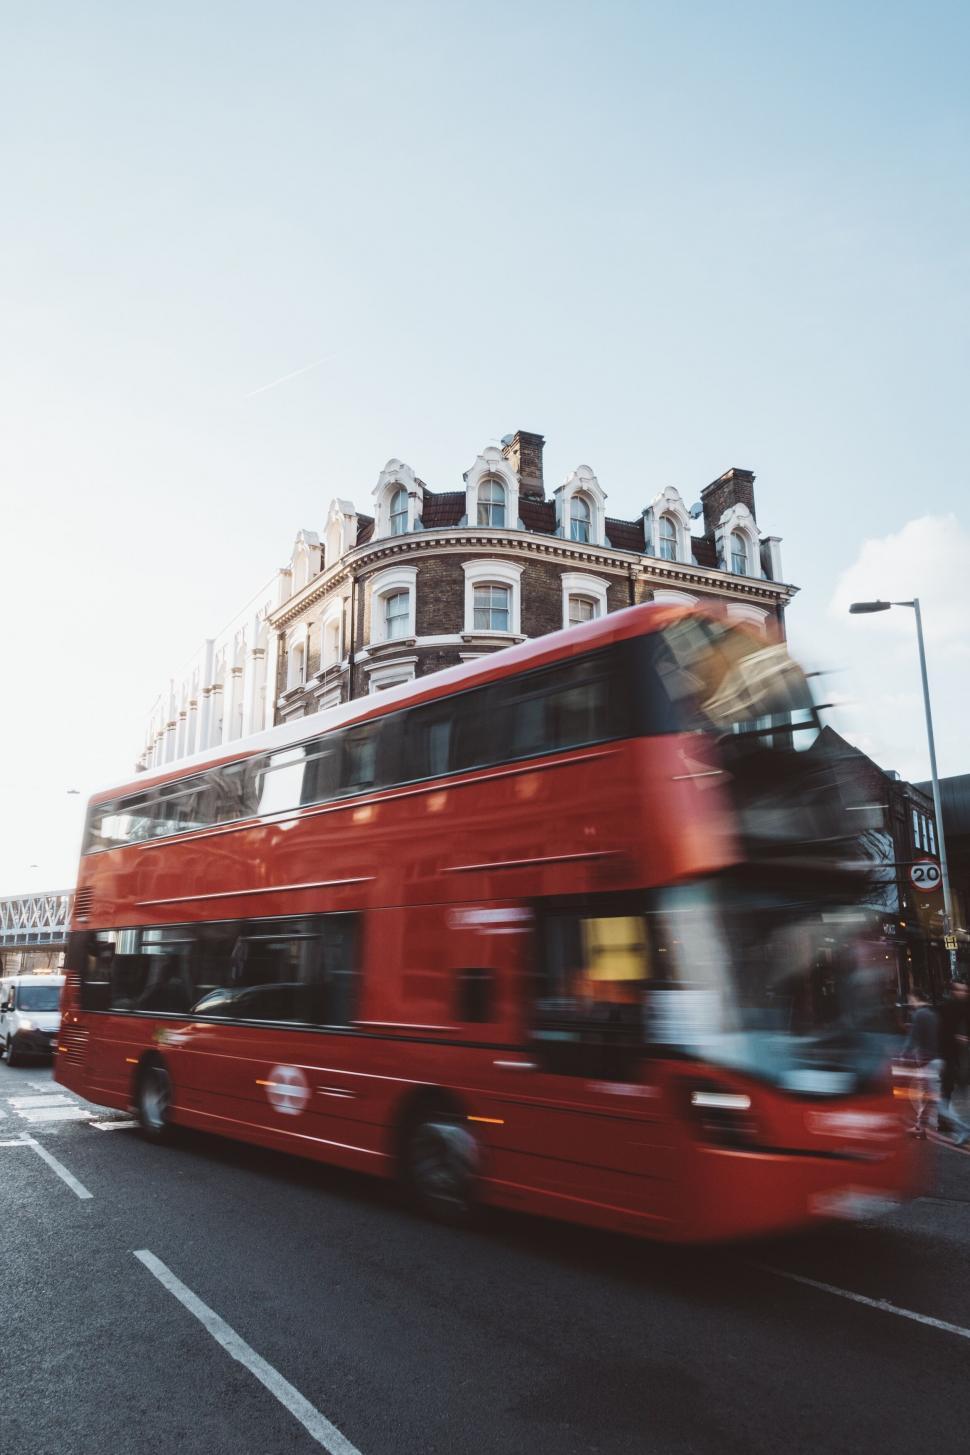 Free Image of Red double-decker bus speeding in London 